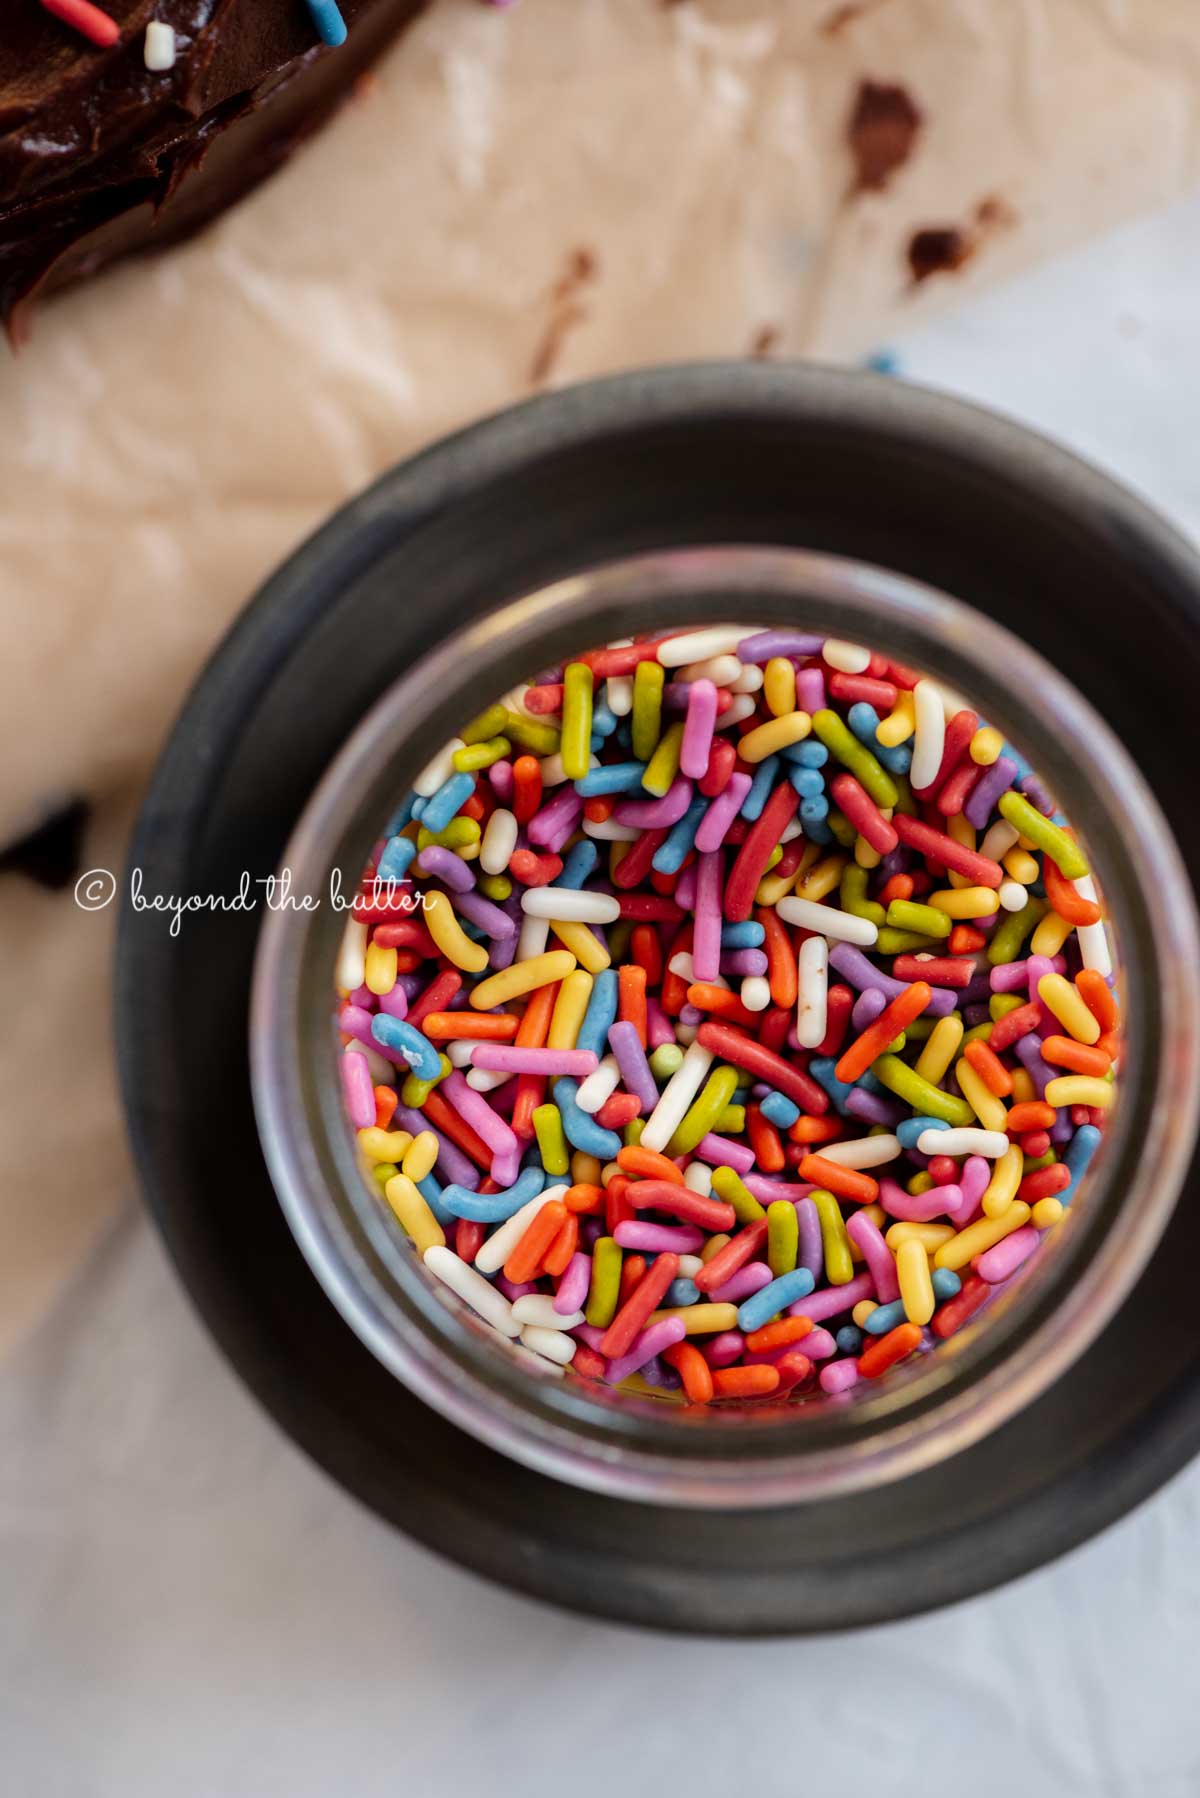 Small bowl of rainbow sprinkles on a dark plate with chocolate cake next to it | All Images © Beyond the Butter®